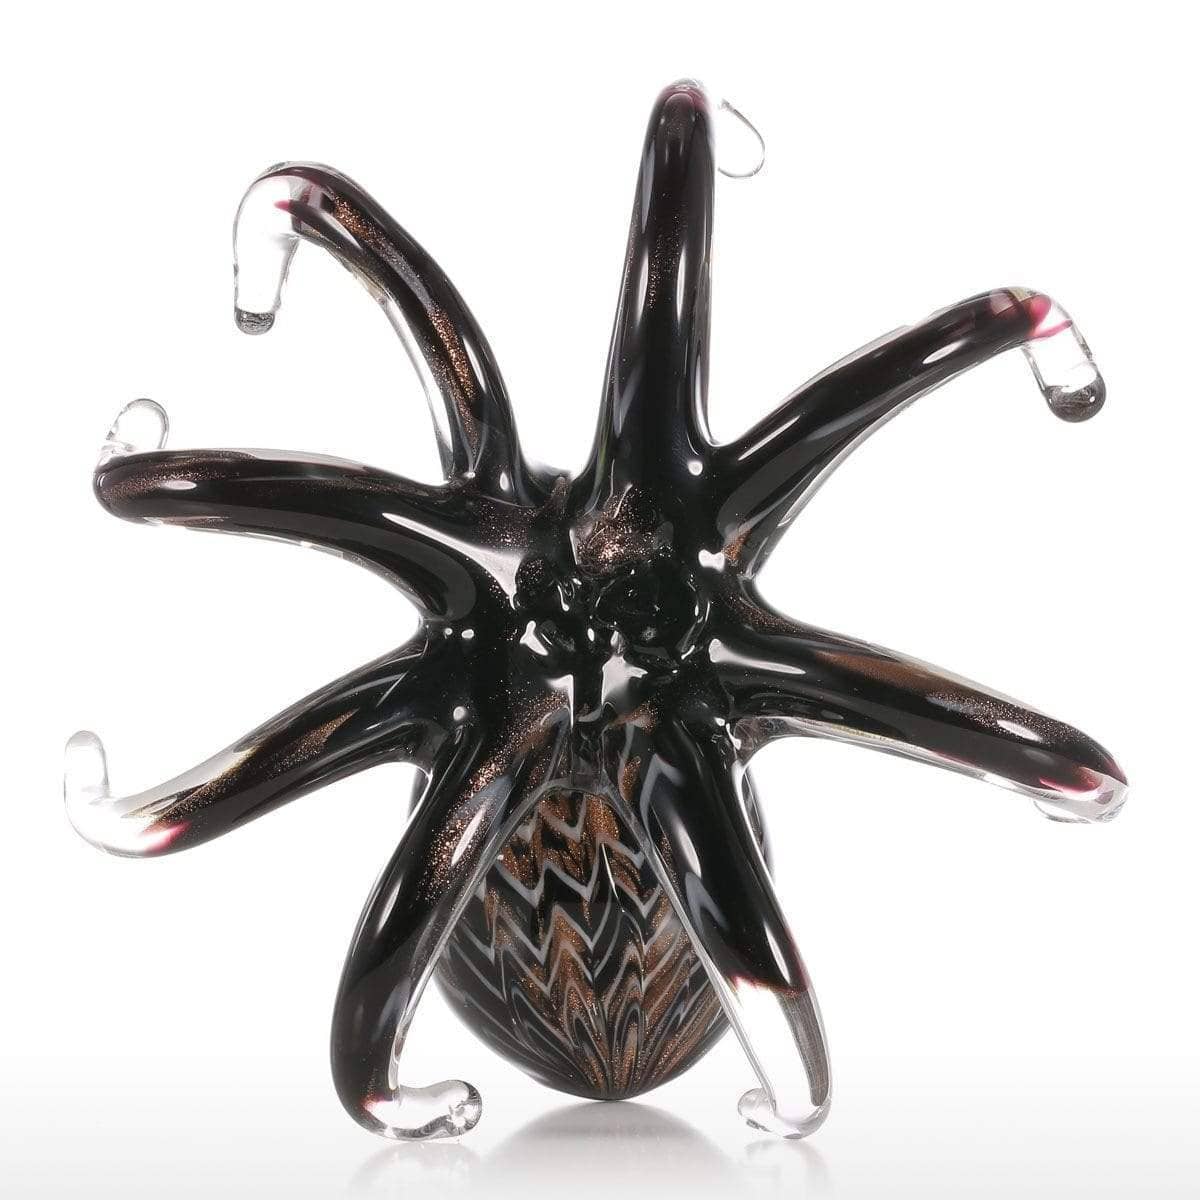 Fashionable & Elegant Octopus Sculpture - Eye-Catching on First Sight